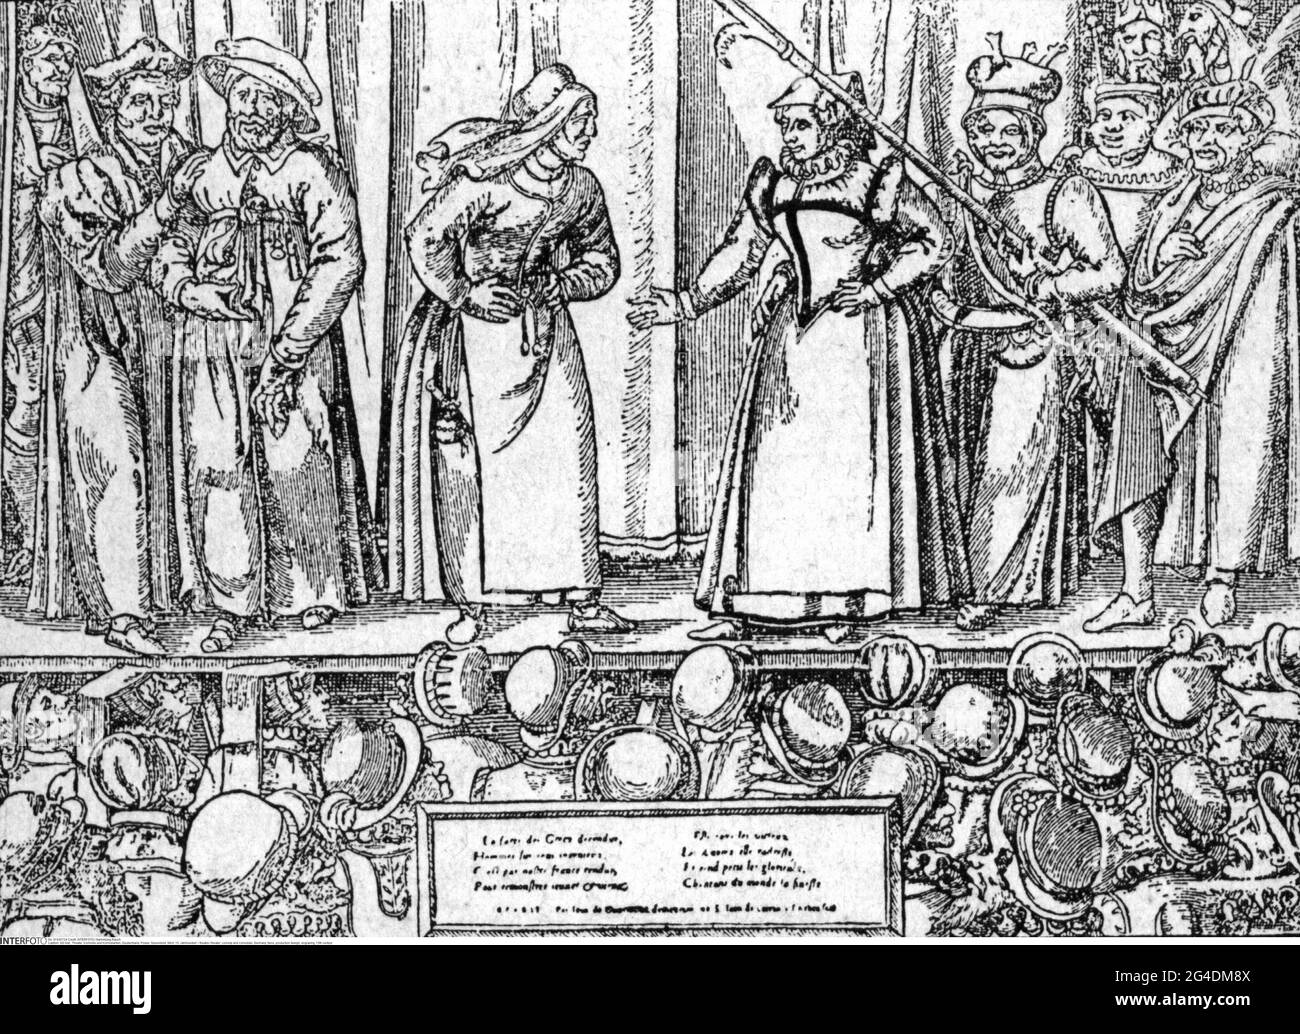 theatre / theater, comedy and comedian, Germany, farce, production design, engraving, 15th century, ARTIST'S COPYRIGHT HAS NOT TO BE CLEARED Stock Photo